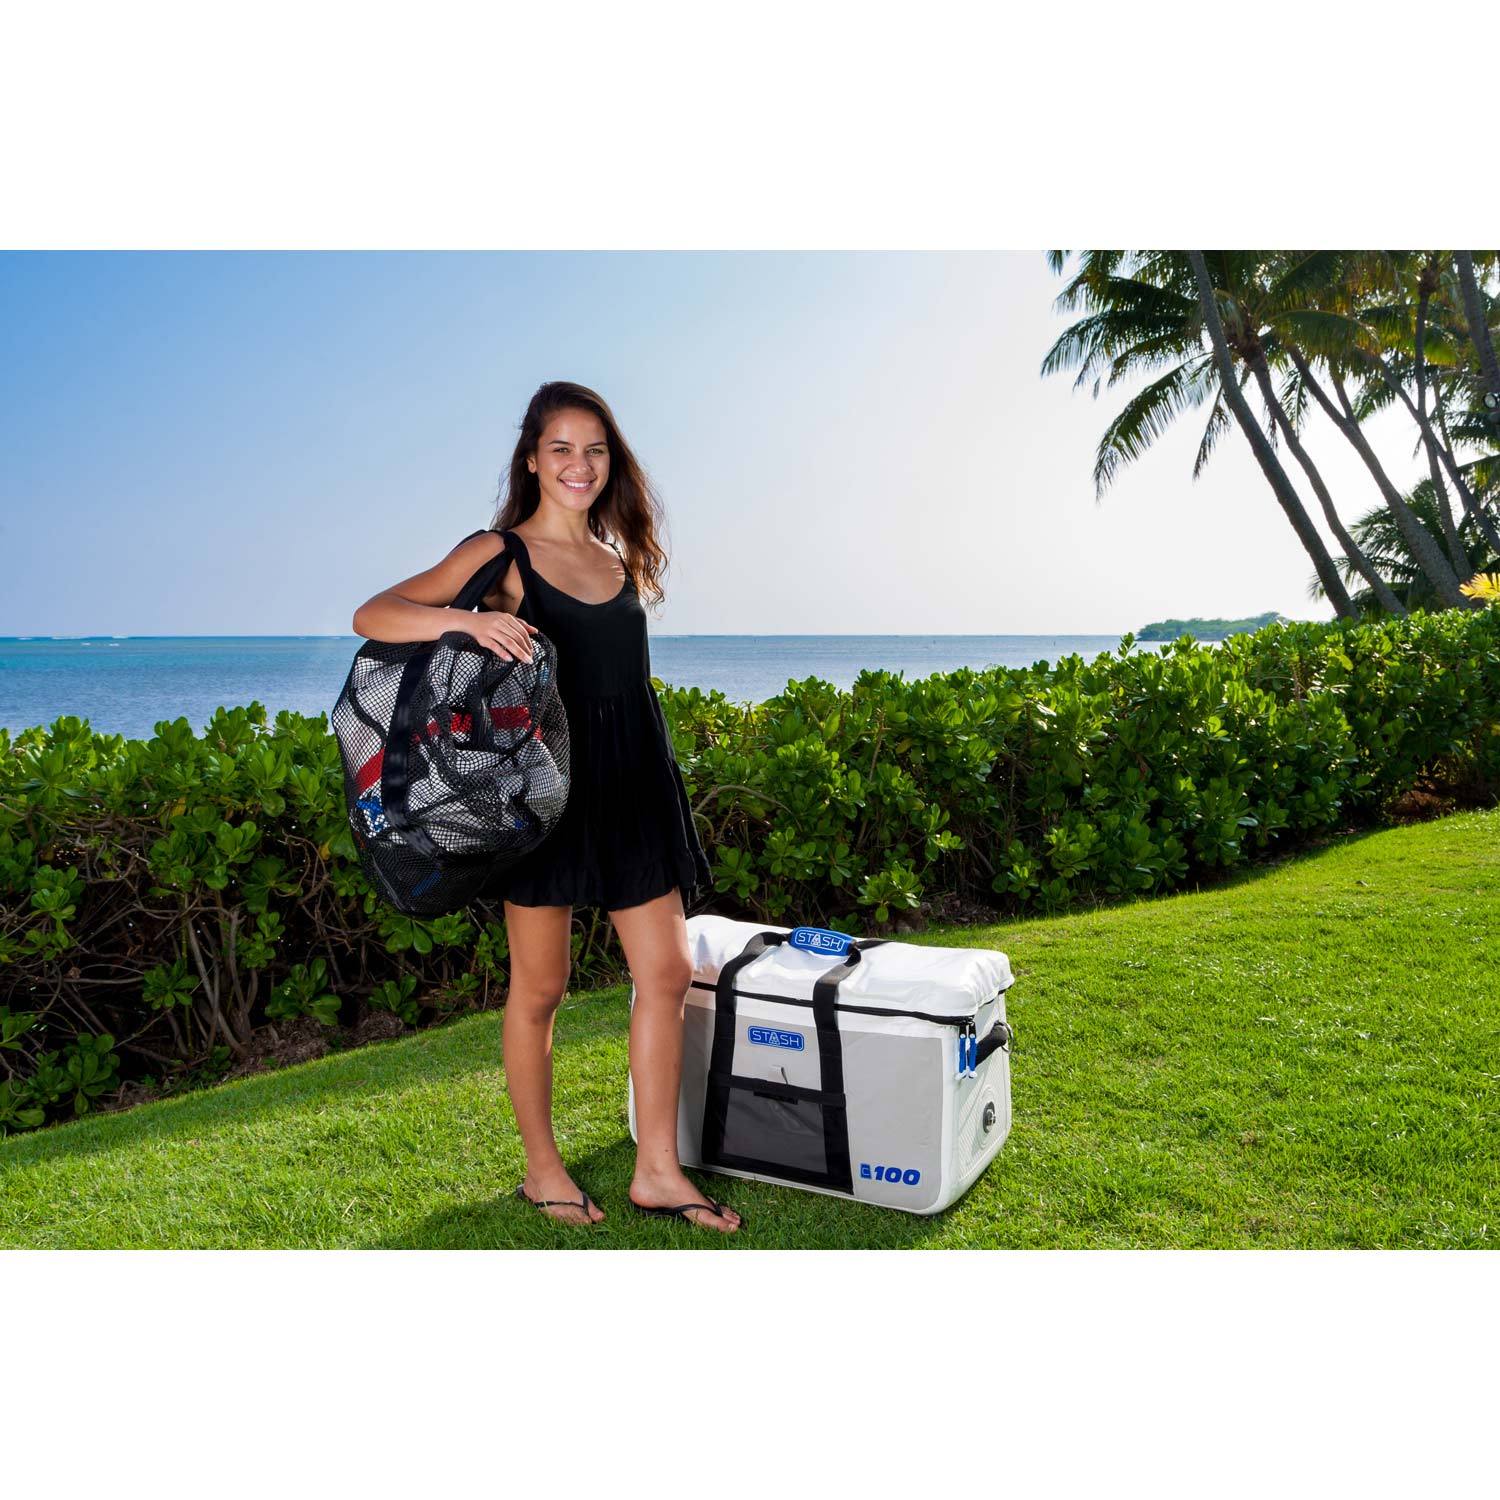 STASH COOLERS C100 Inflatable Cooler